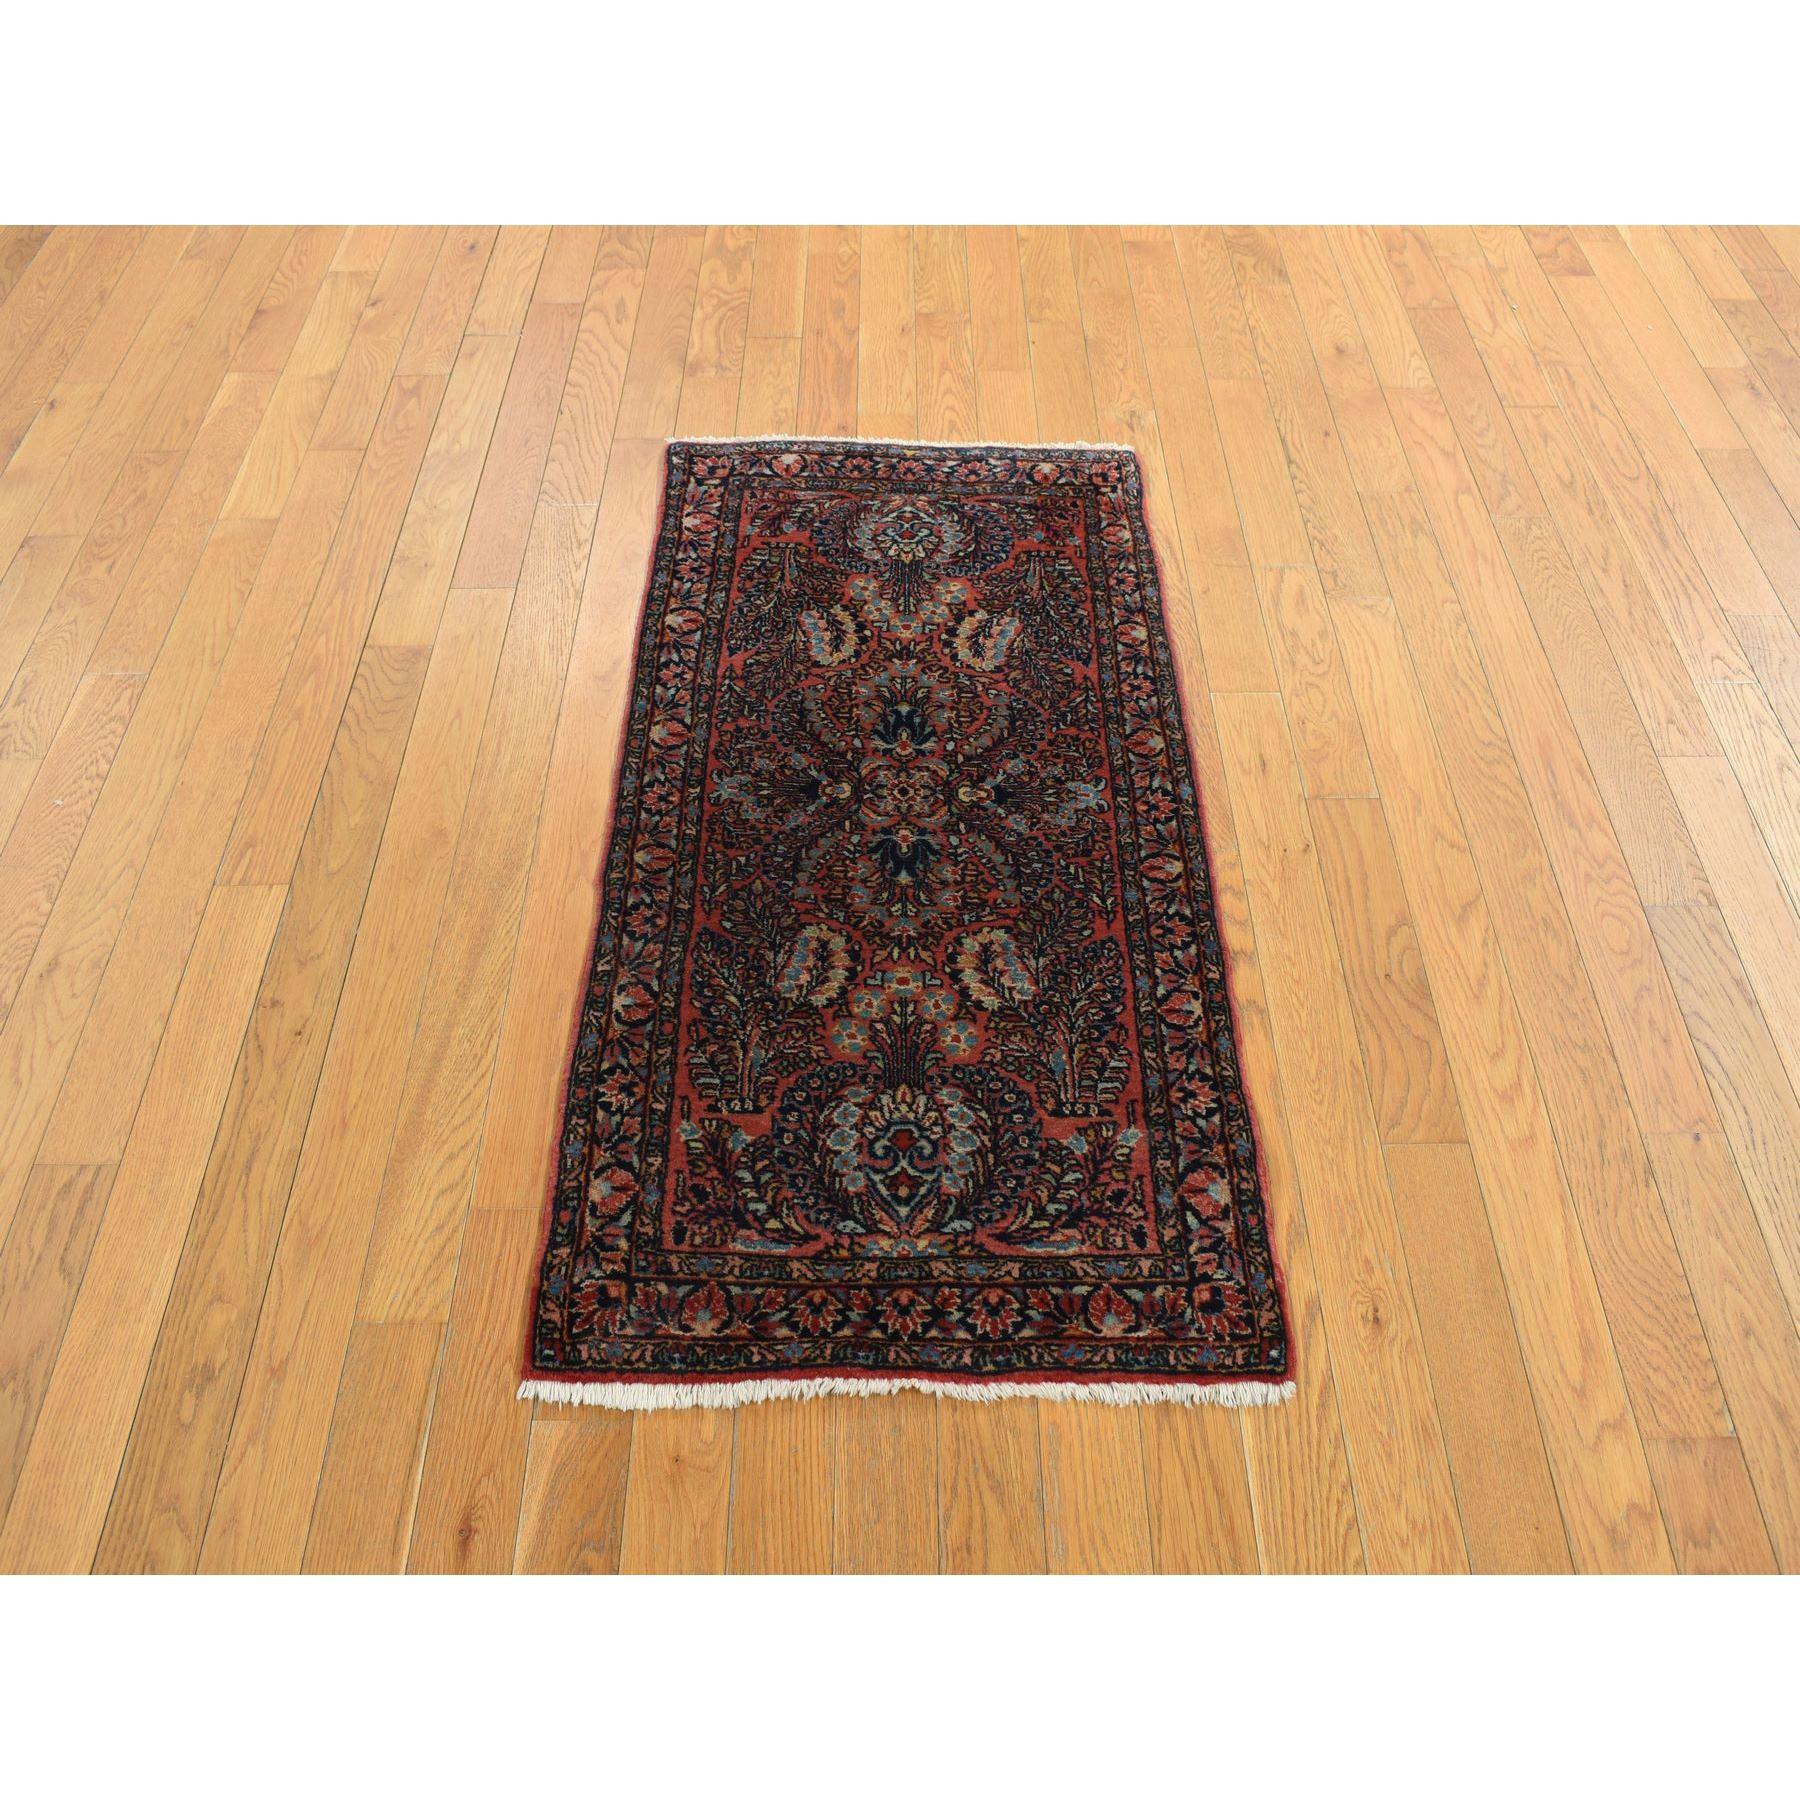 This fabulous Hand-Knotted carpet has been created and designed for extra strength and durability. This rug has been handcrafted for weeks in the traditional method that is used to make
Exact Rug Size in Feet and Inches : 2'1